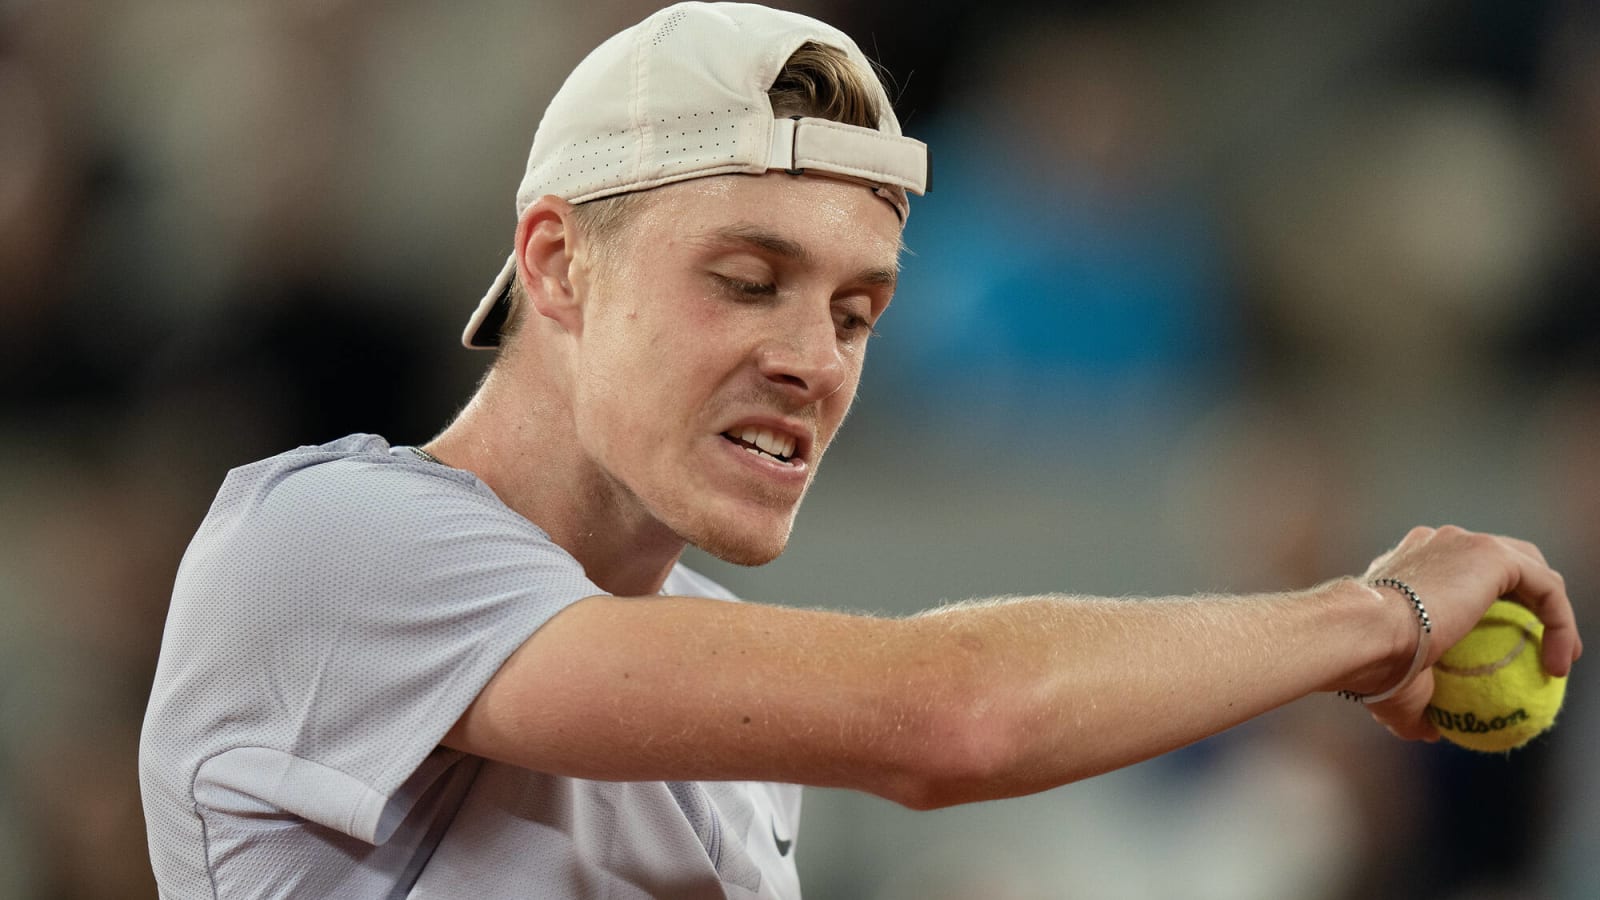 &#39;Awful&#39;: Shapovalov Hits Back At &#39;Not Giving Everything&#39; Claims By Former Coach Youzhny